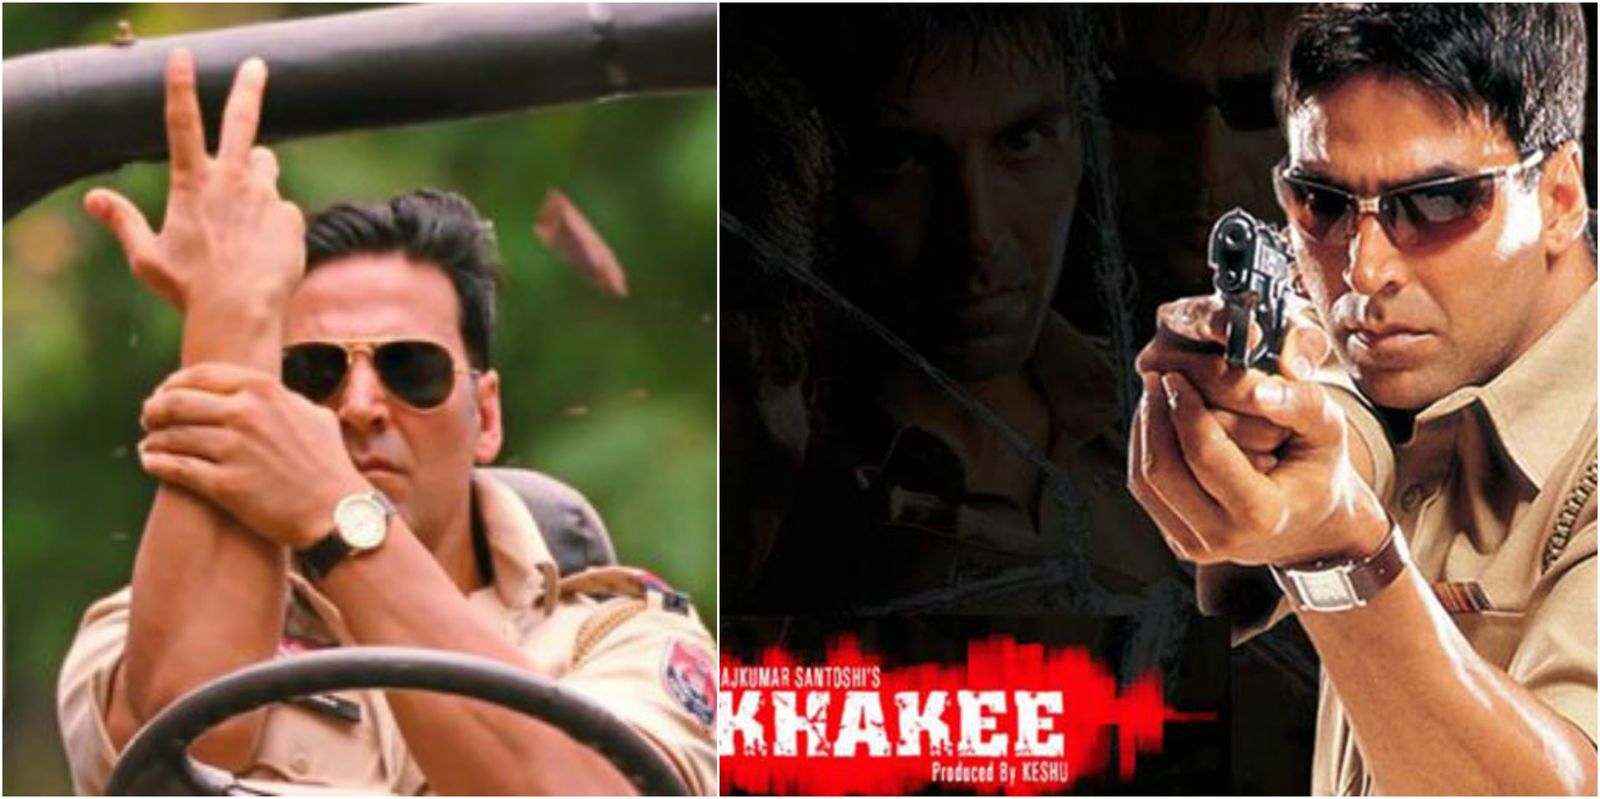 RANKED: Top 5 Highest Grossers Of Akshay Kumar Where He Played A Cop